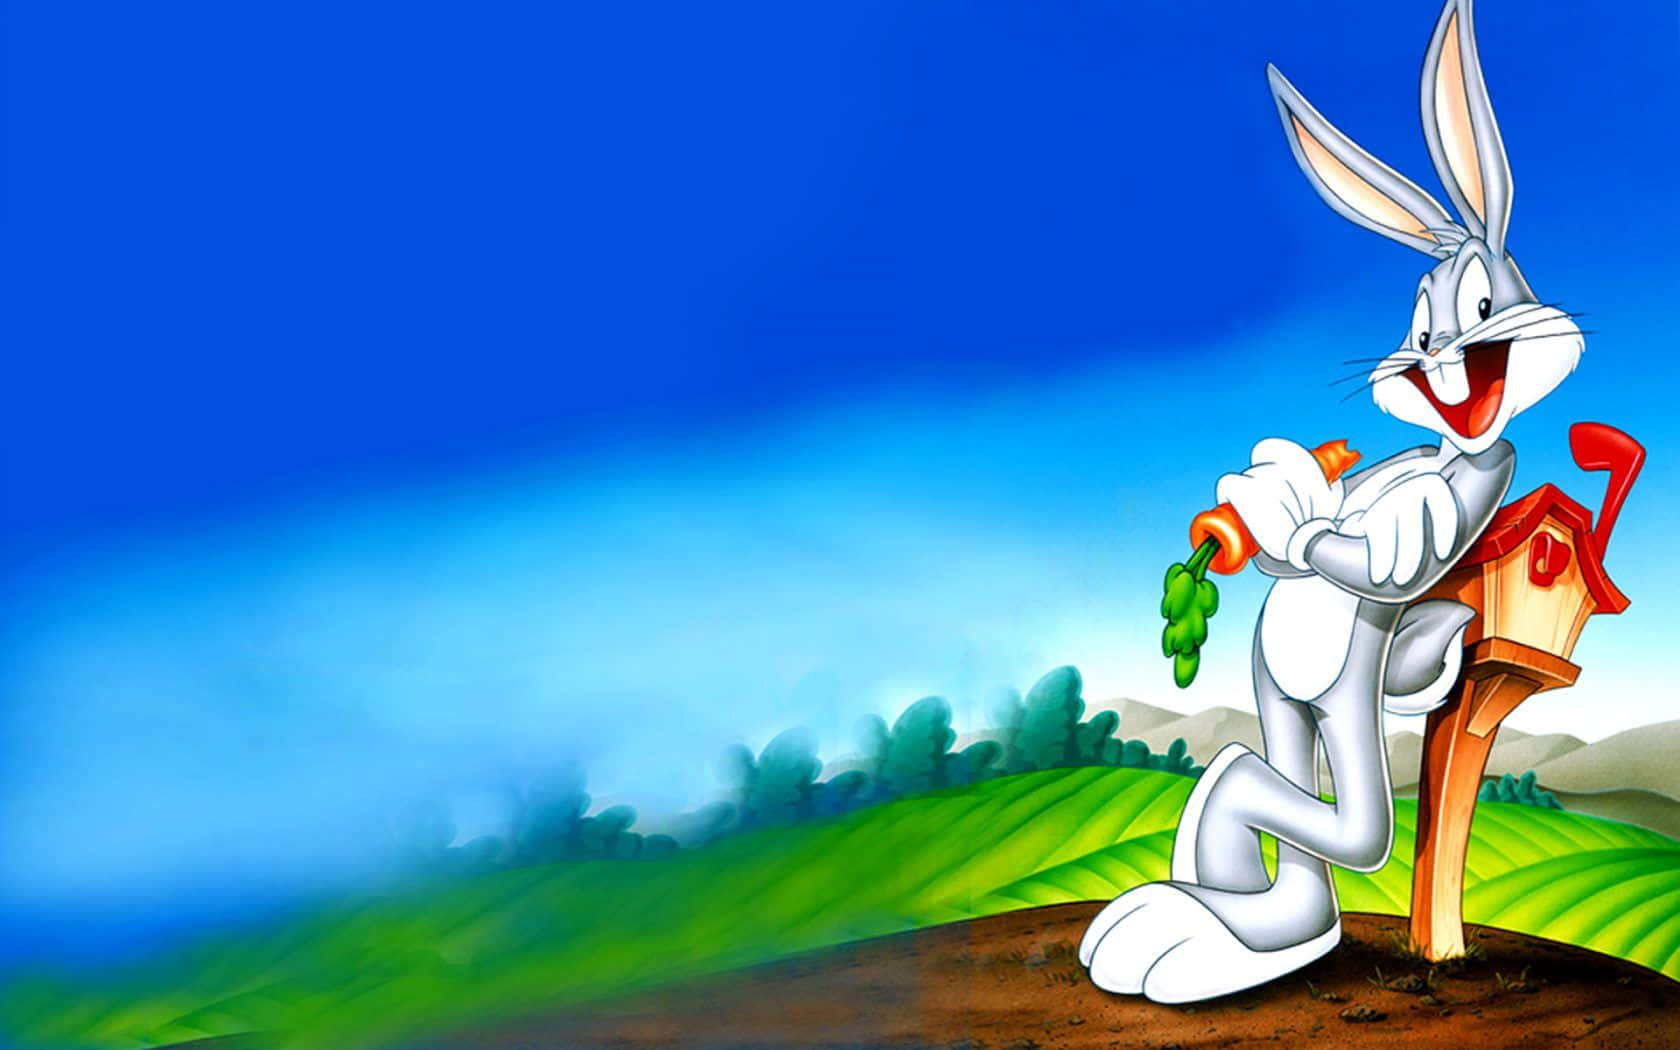 Coolabugs Bunny Post Mail Tapeter (or Bakgrunder For Mobile Devices). Wallpaper